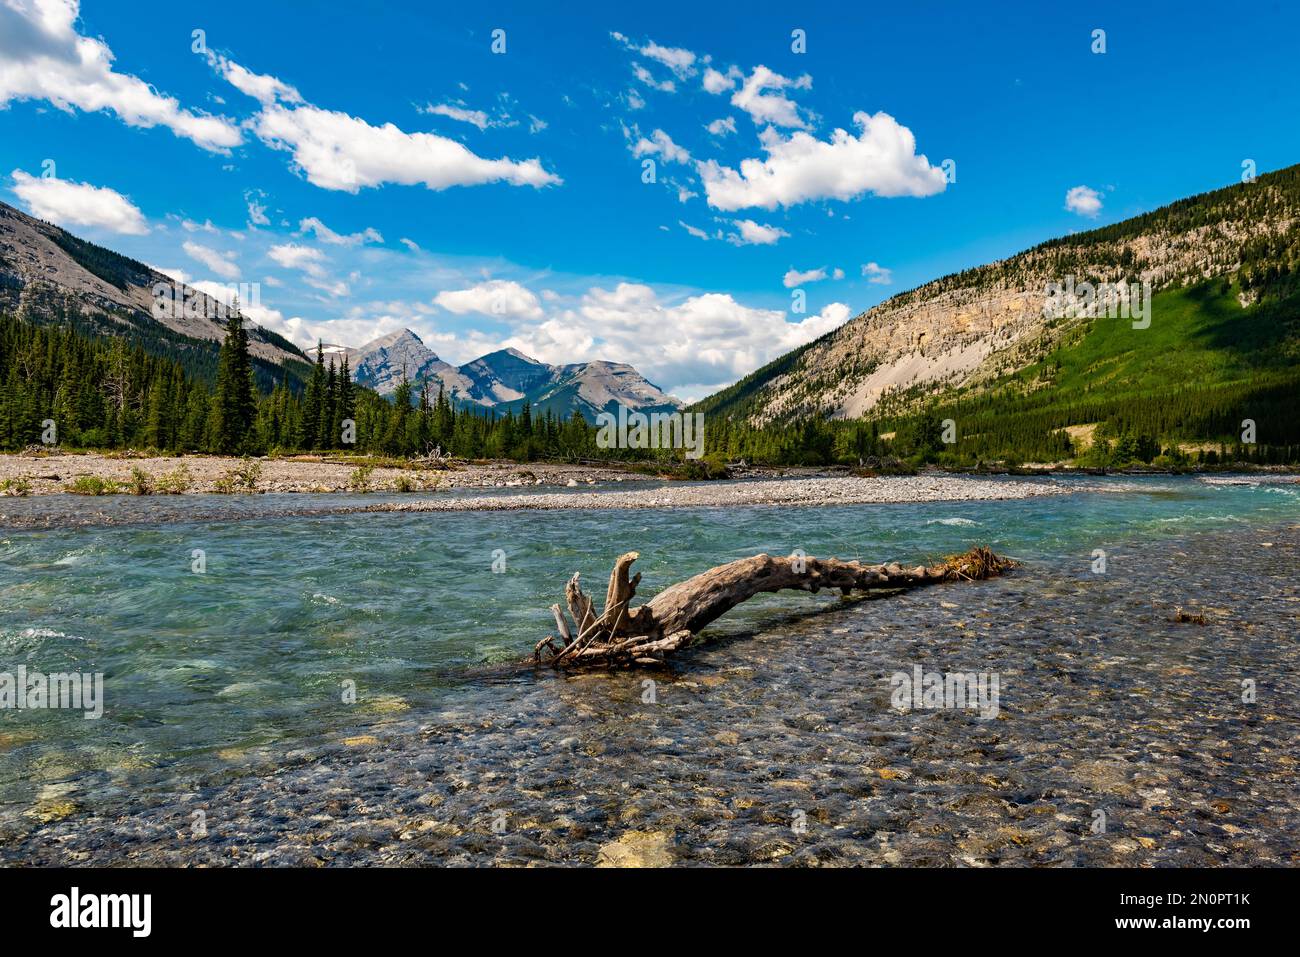 Scenic summer views in the the Canadian Rocky Mountains. Kananaskis Country Alberta Canada Stock Photo